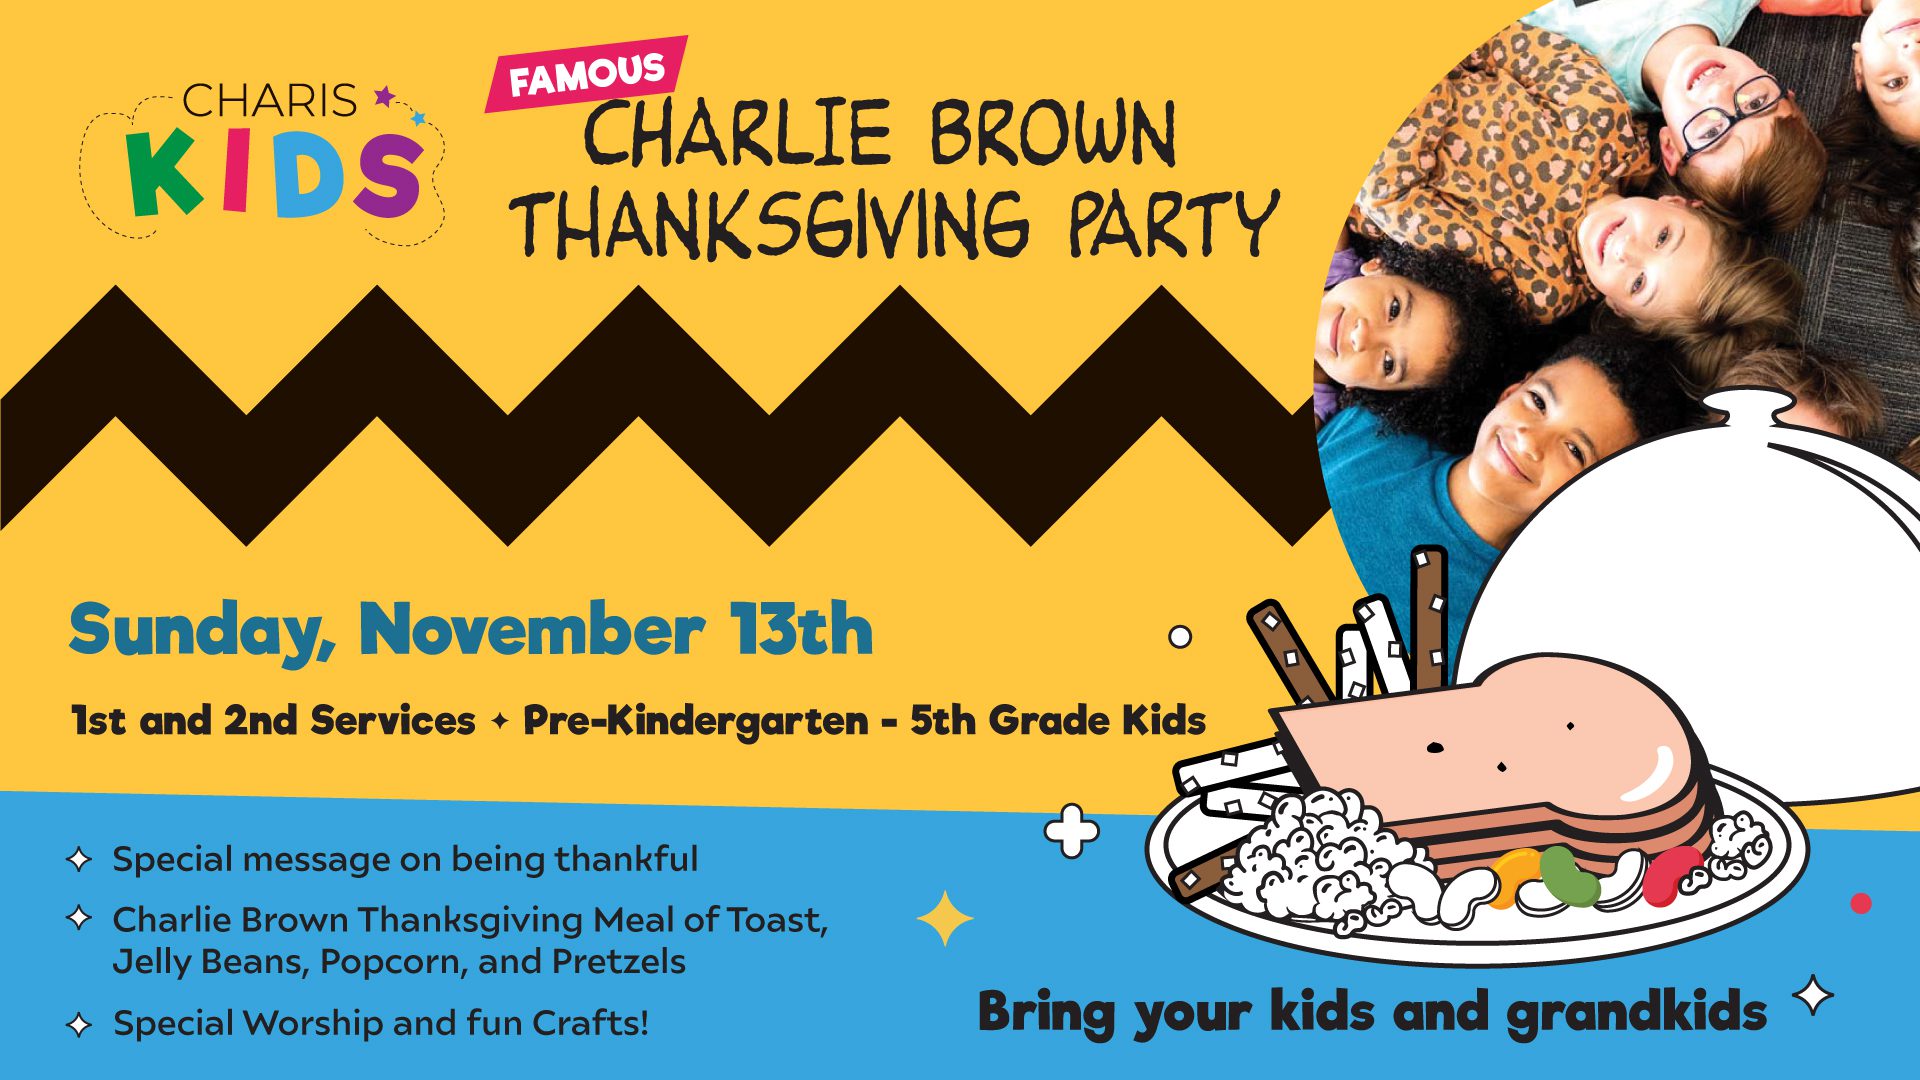 Famous Charlie Brown Thanksgiving Party at Charis Christian Center